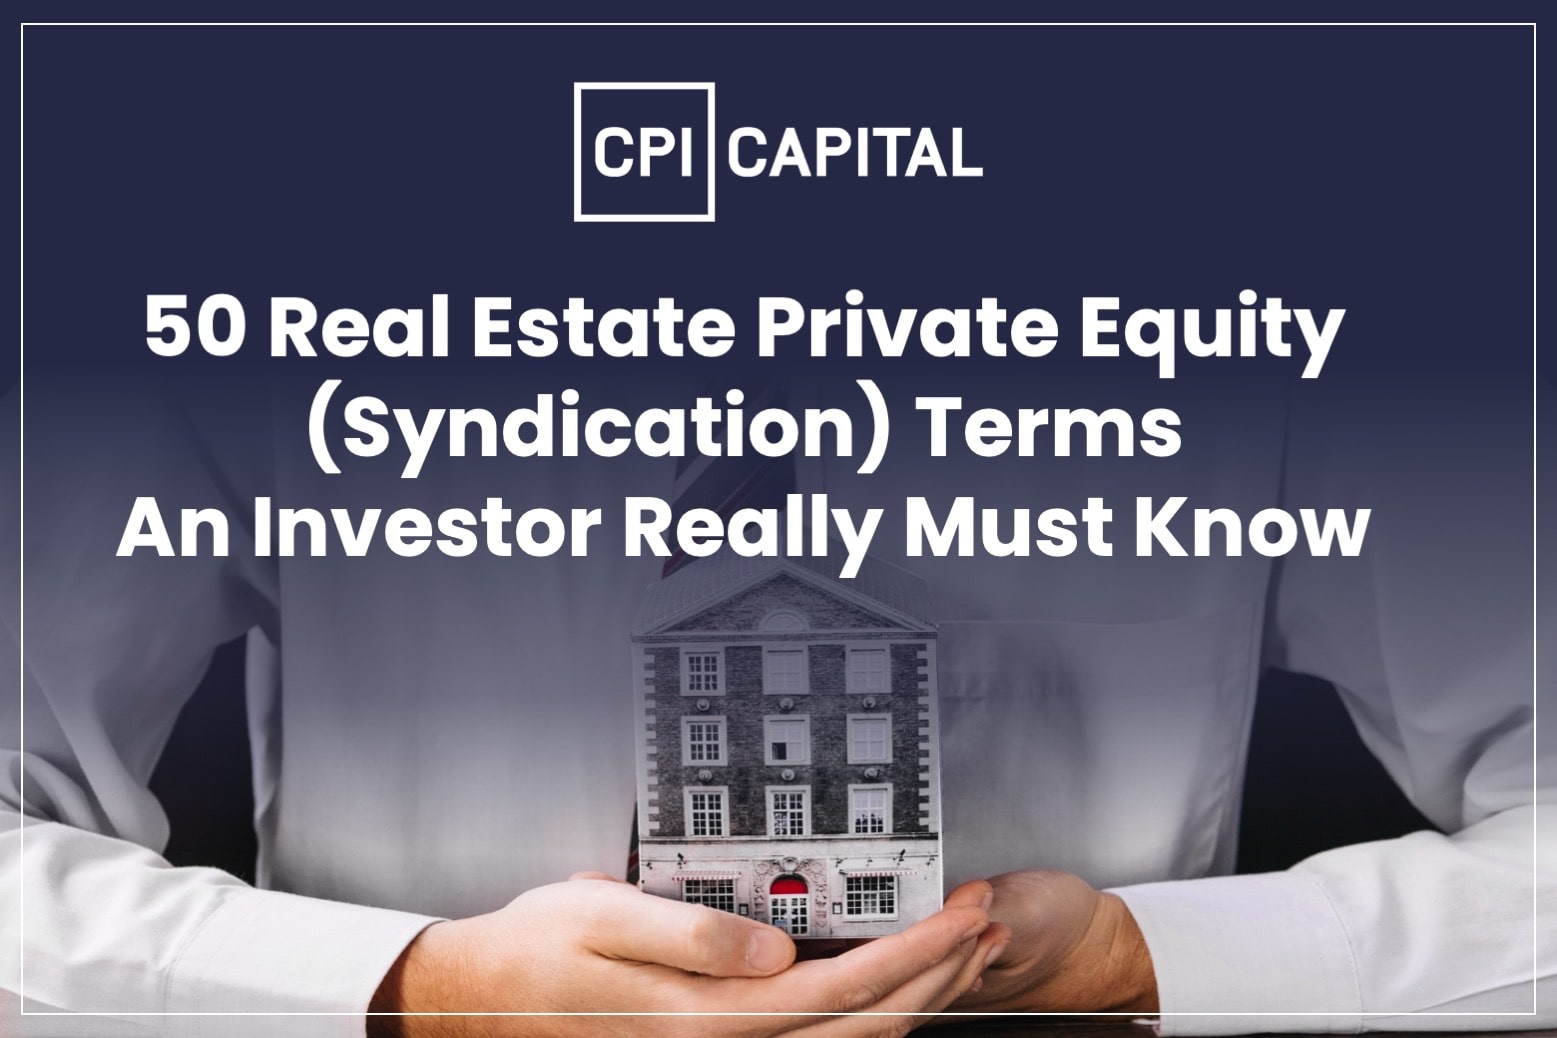 50 Real Estate Private Equity (Syndication) Terms An Investor Really Must Know